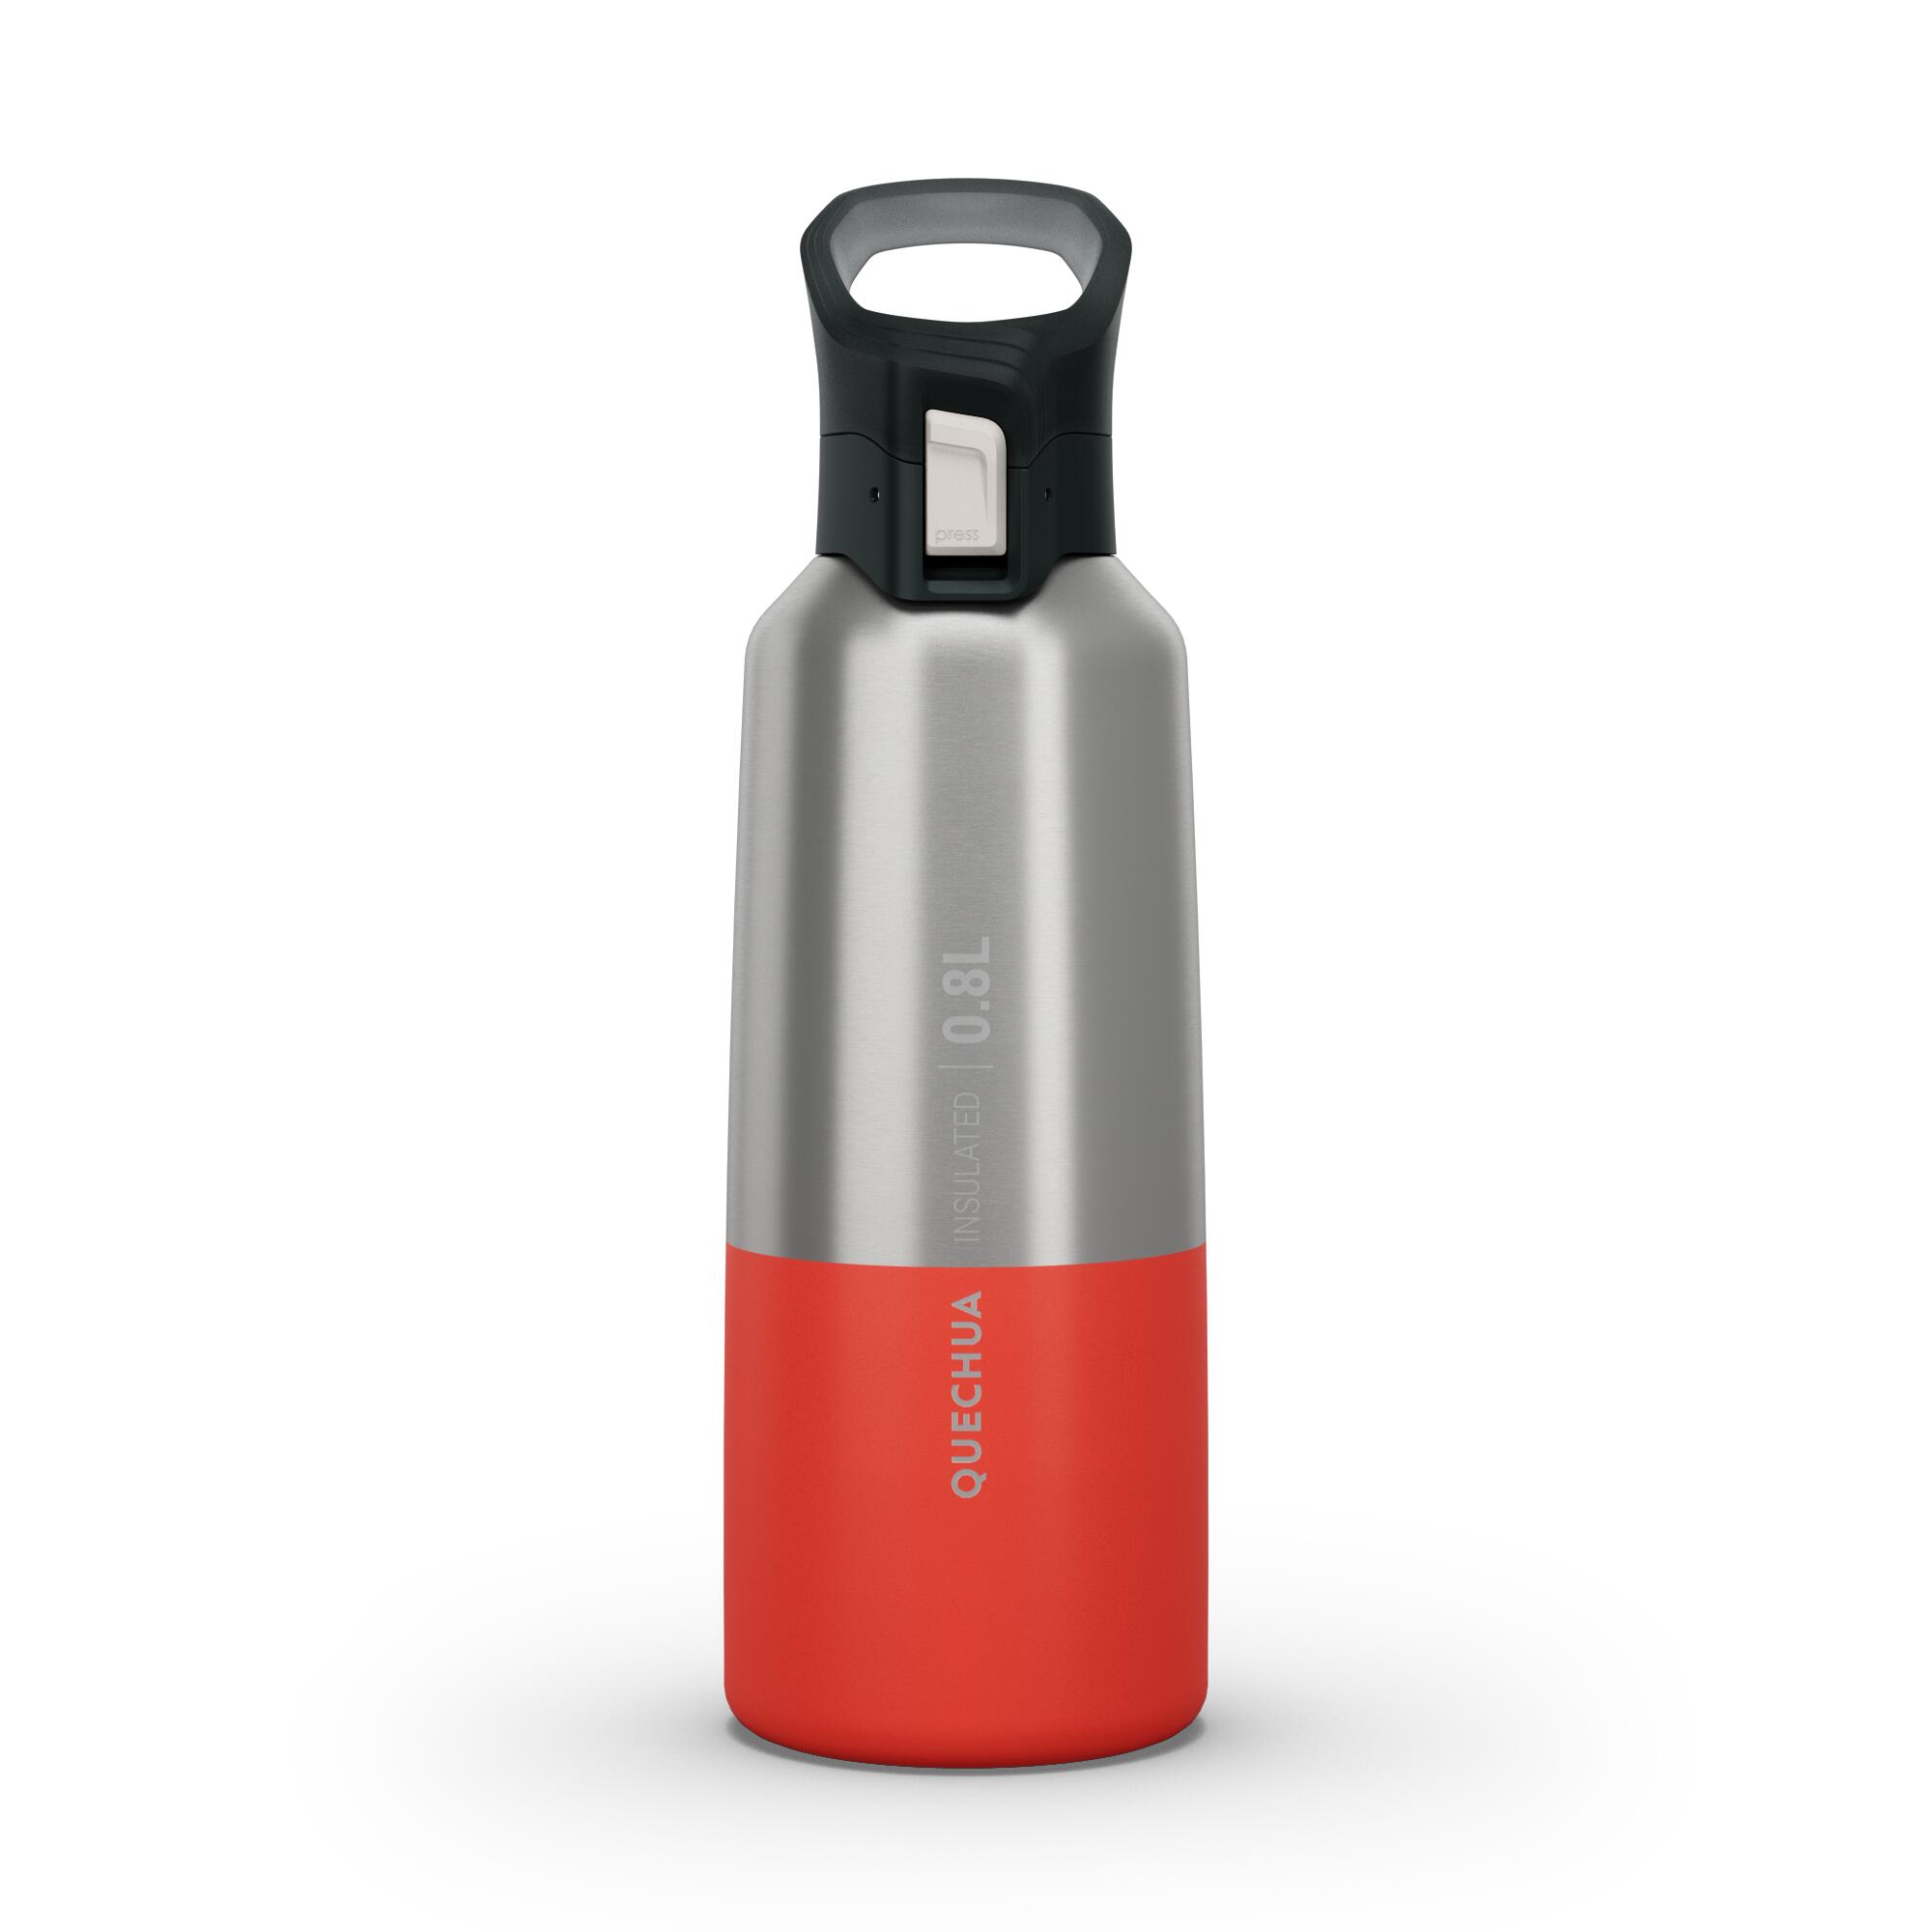 0.8 L stainless steel water bottle with quick-open cap for hiking - Red 18/35